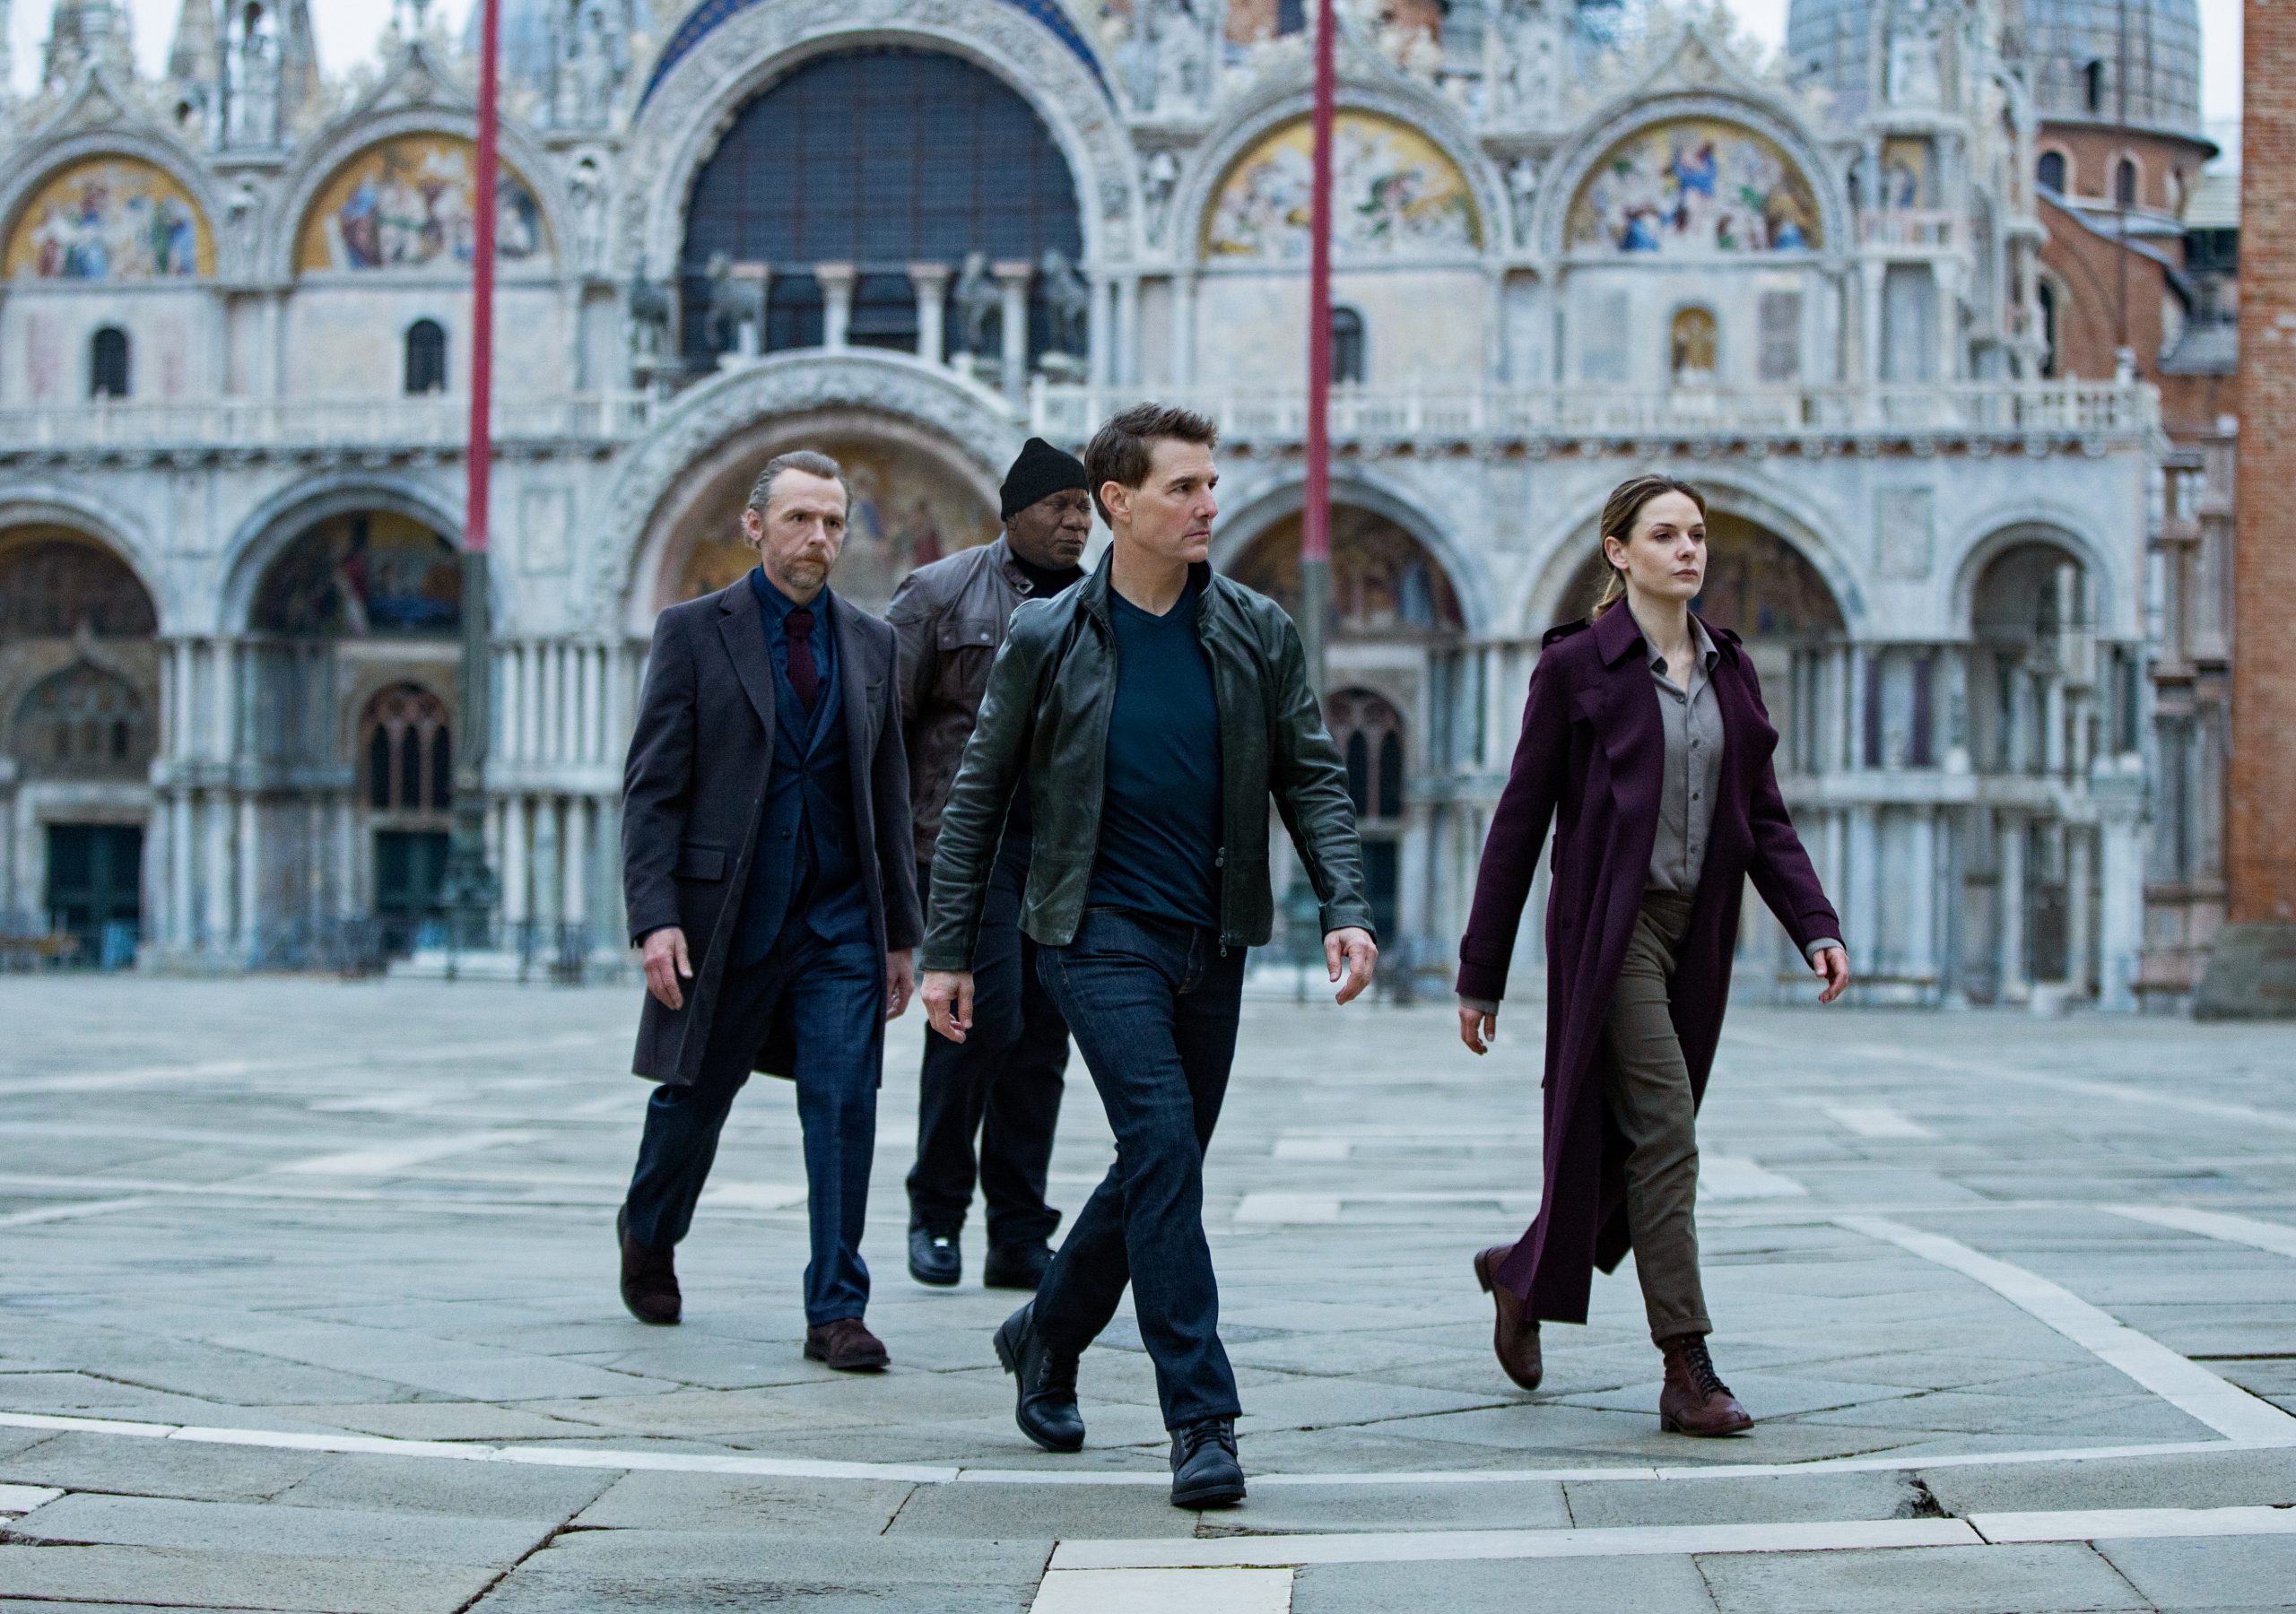 Four characters stride confidently across a grand European square in a still from Mission: Impossible - Dead Reckoning Part One, available as an HD desktop wallpaper and background.